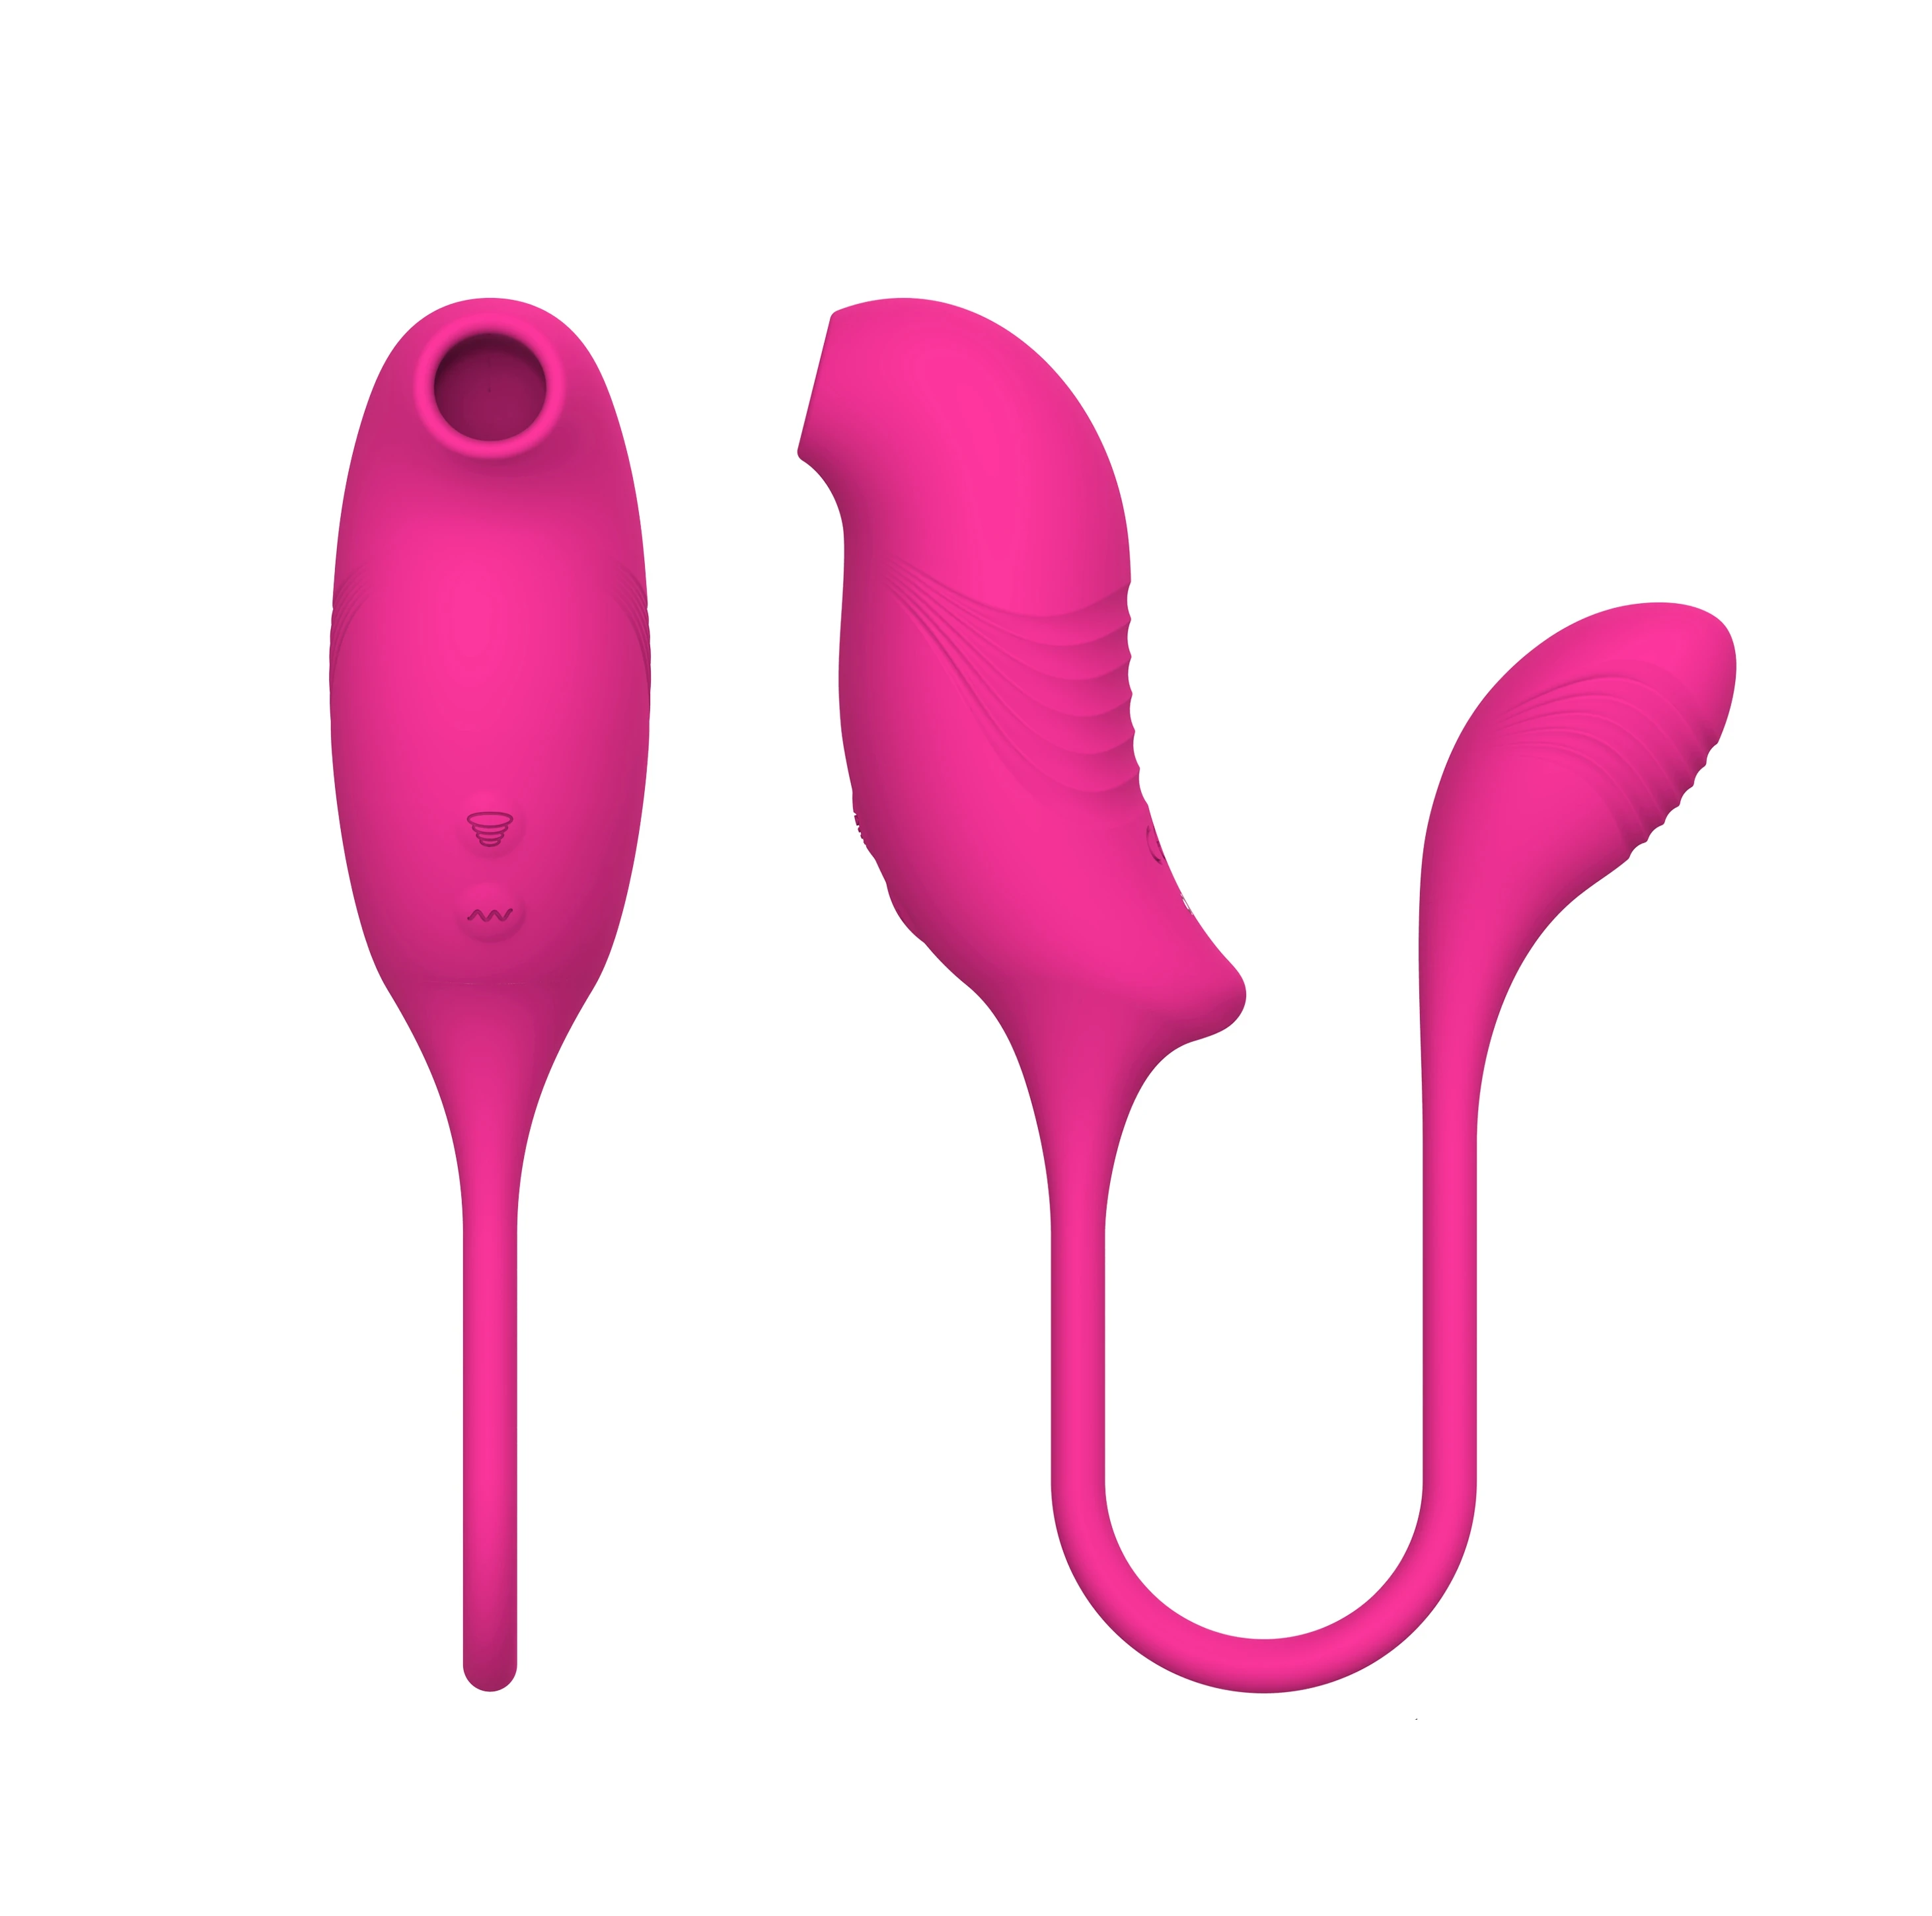 Clit Anal Sex - Amazon Best Selling 2 In 1 Female Masturbation Silicone G Spot Vibrator  Clitoris Sucker Anal Clit Massage Sex Toys For Women - Buy Sex Toy For  Women,G Spot Vibrator,Clitoris Sucker Product on